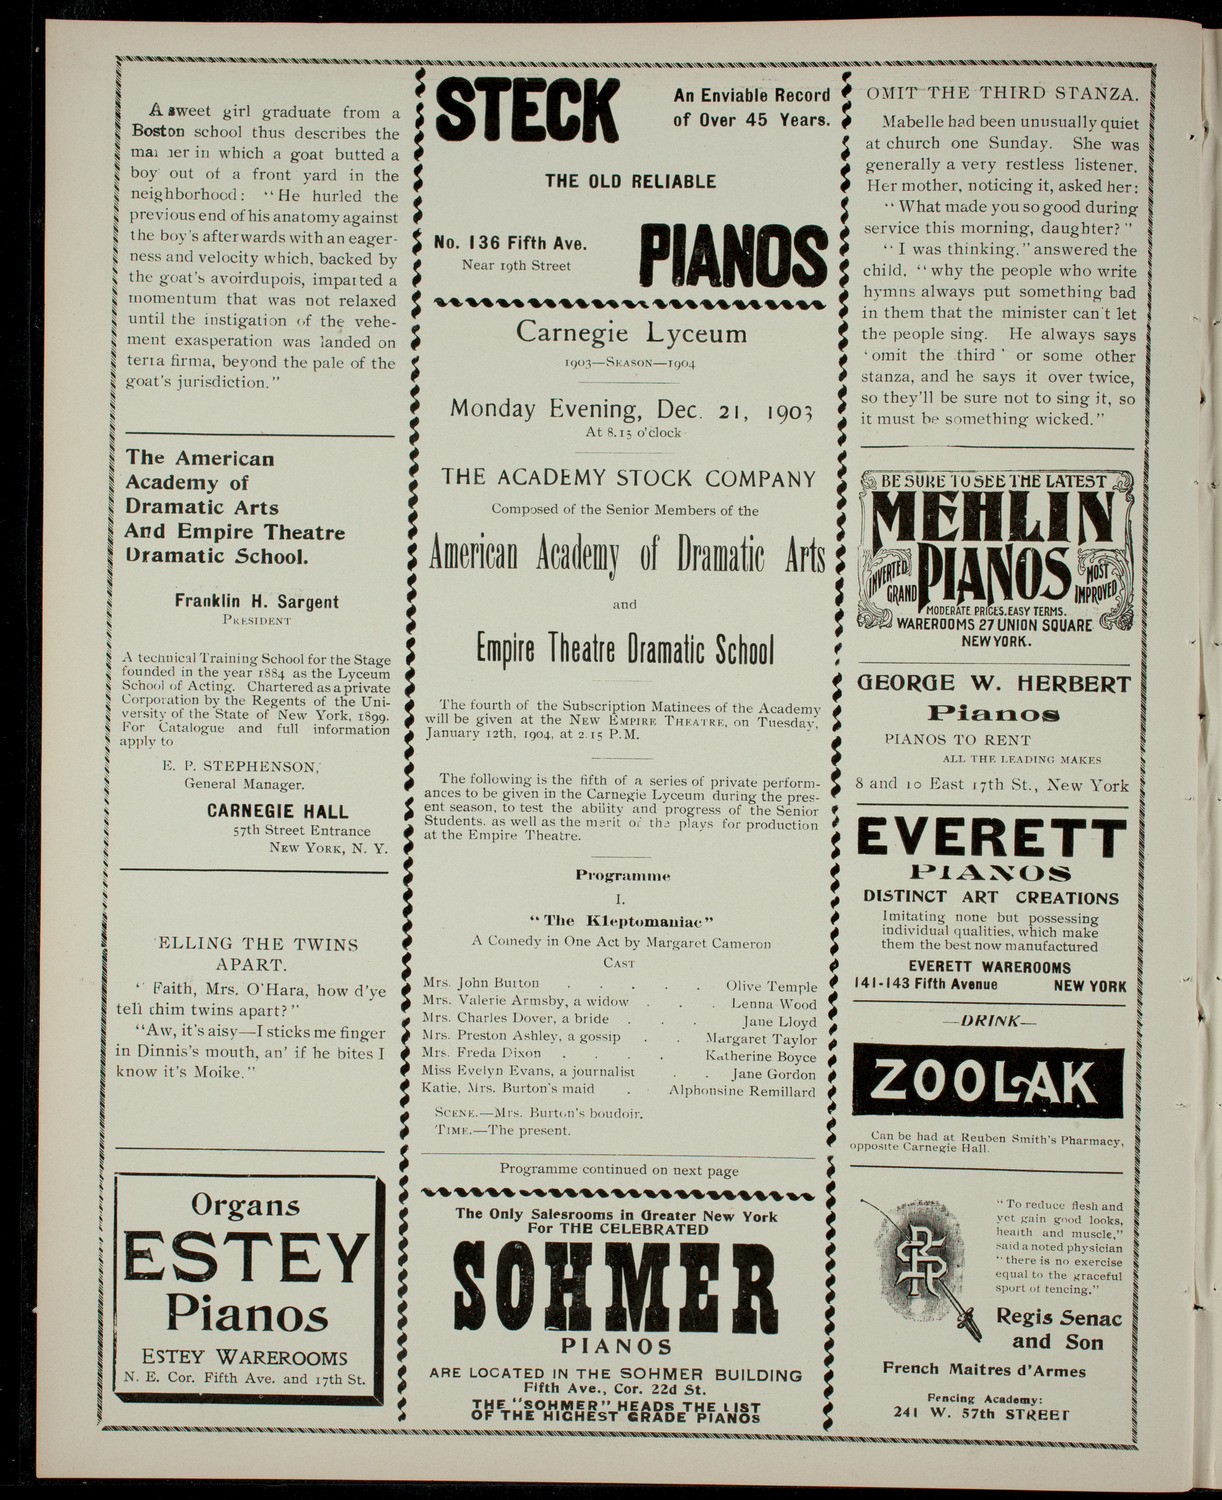 Academy Stock Company of the American Academy of Dramatic Arts/ Empire Theatre Dramatic School, December 21, 1903, program page 2